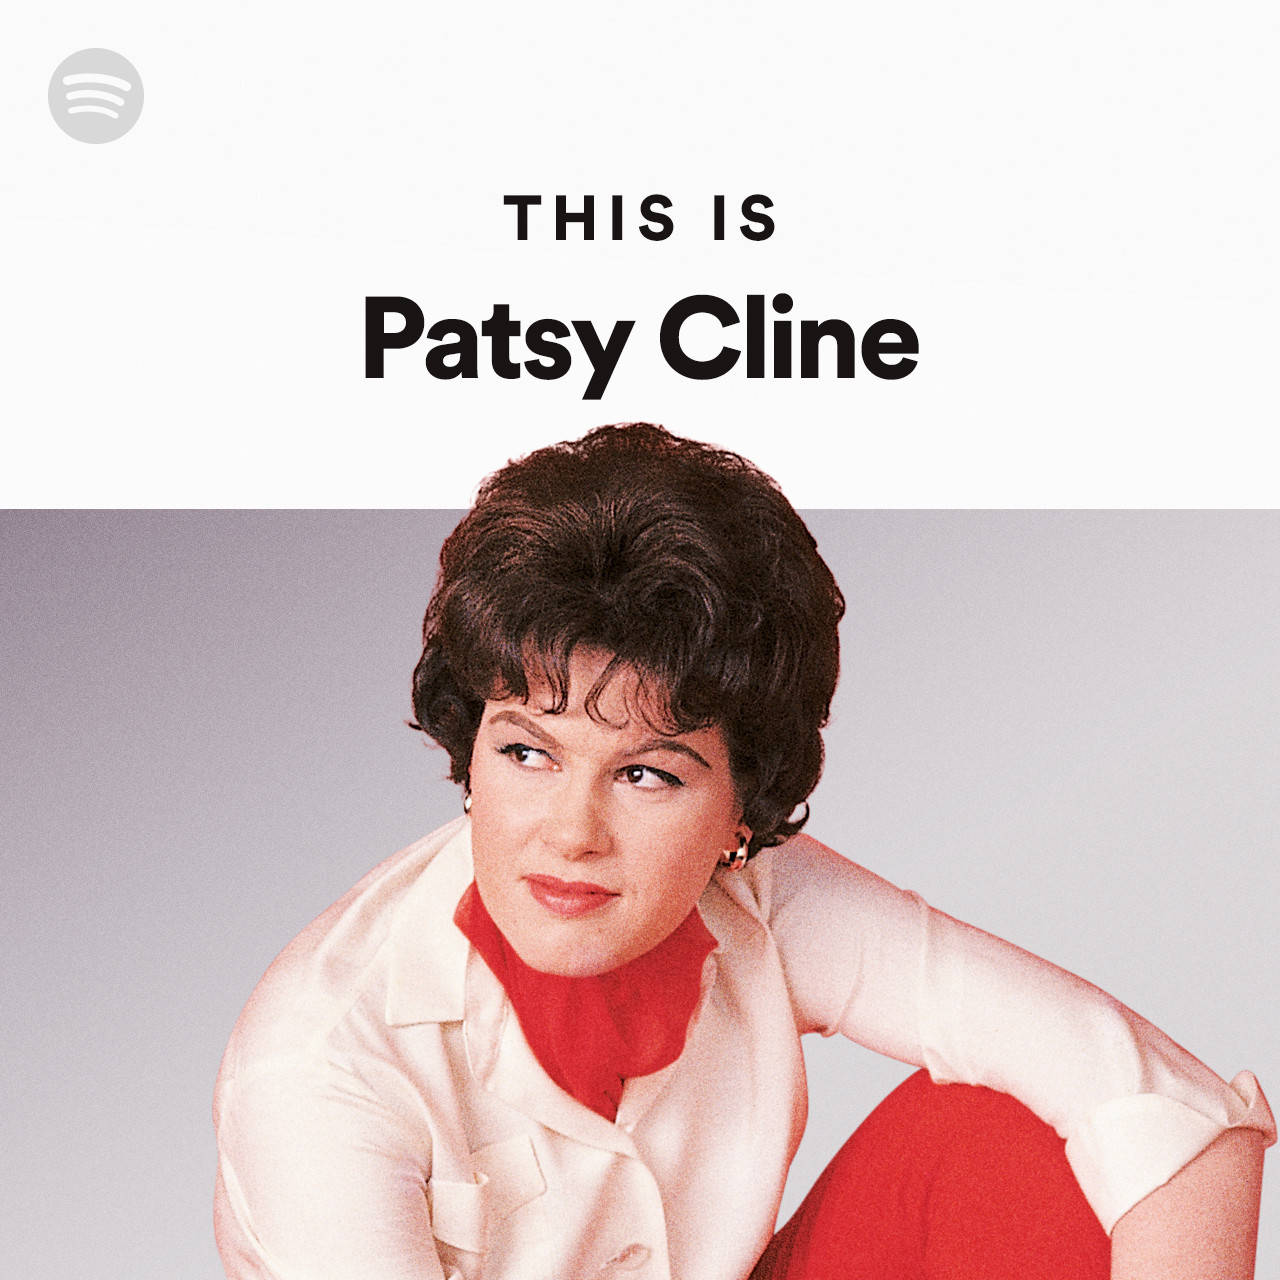 This Is Patsy Cline Spotify Wallpaper